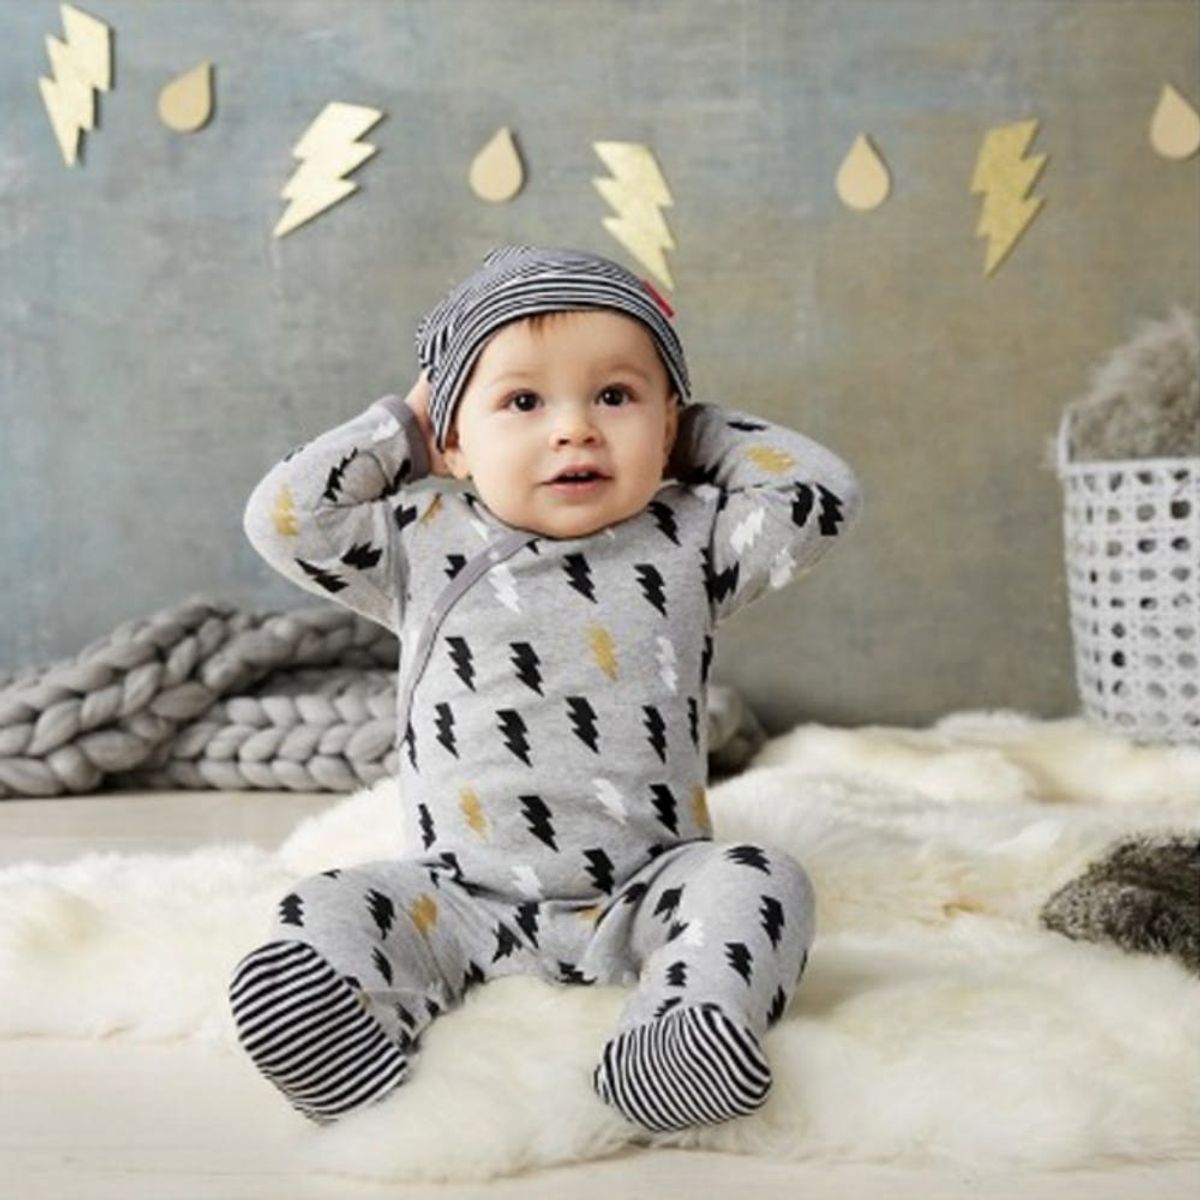 8 Cute Outfits for Bringing Baby Home from the Hospital